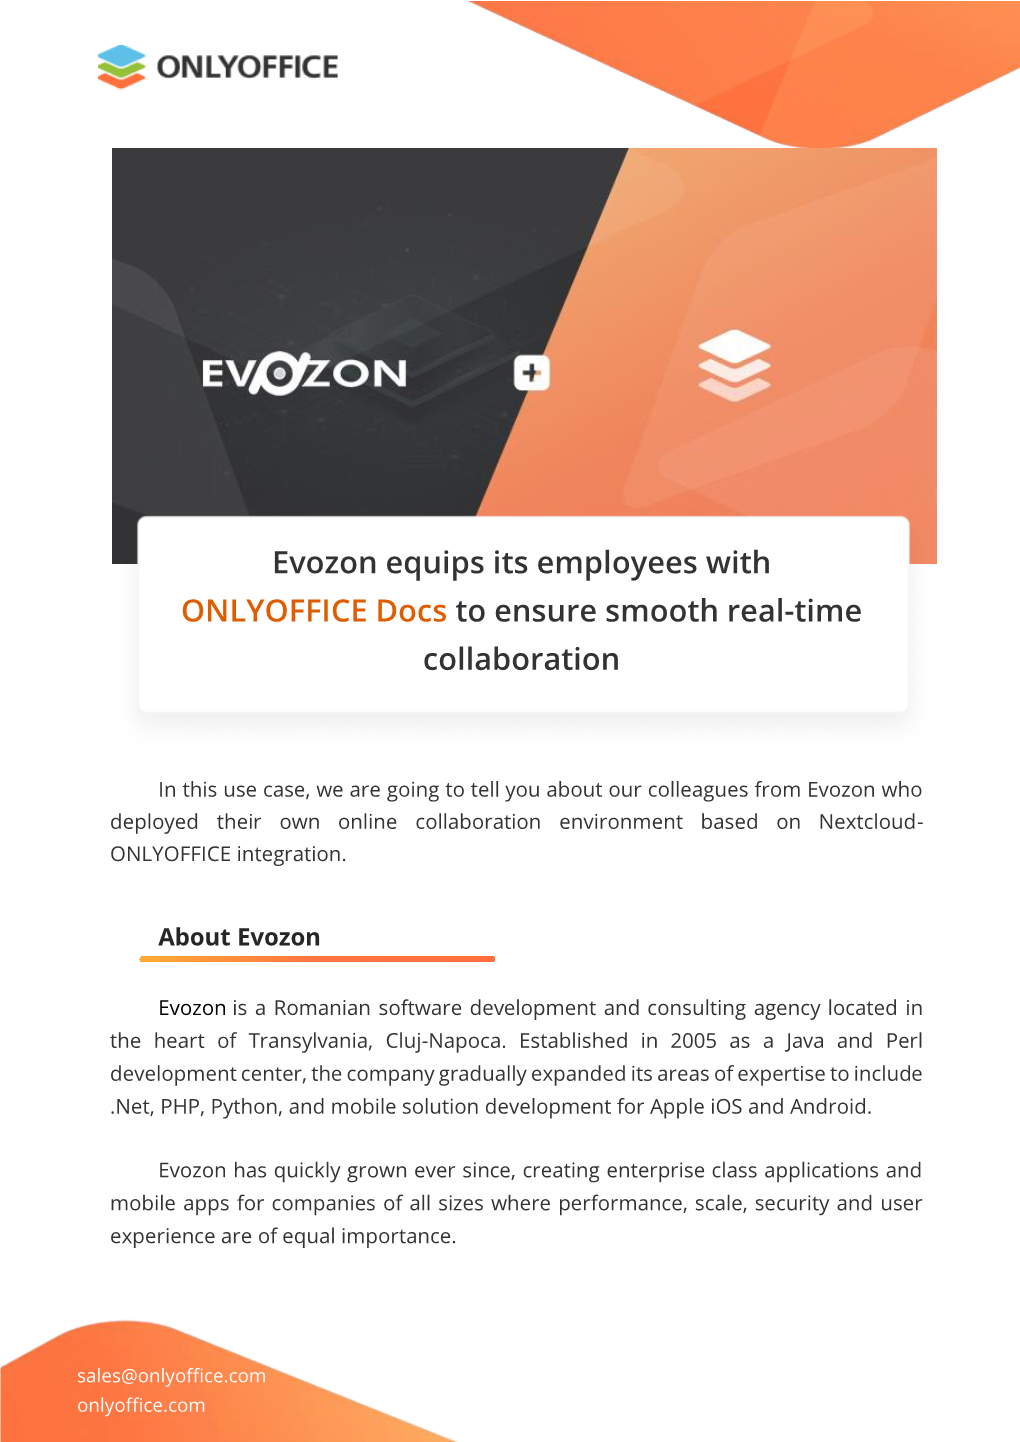 Evozon Equips Its Employees with ONLYOFFICE Docs to Ensure Smooth Real-Time Collaboration